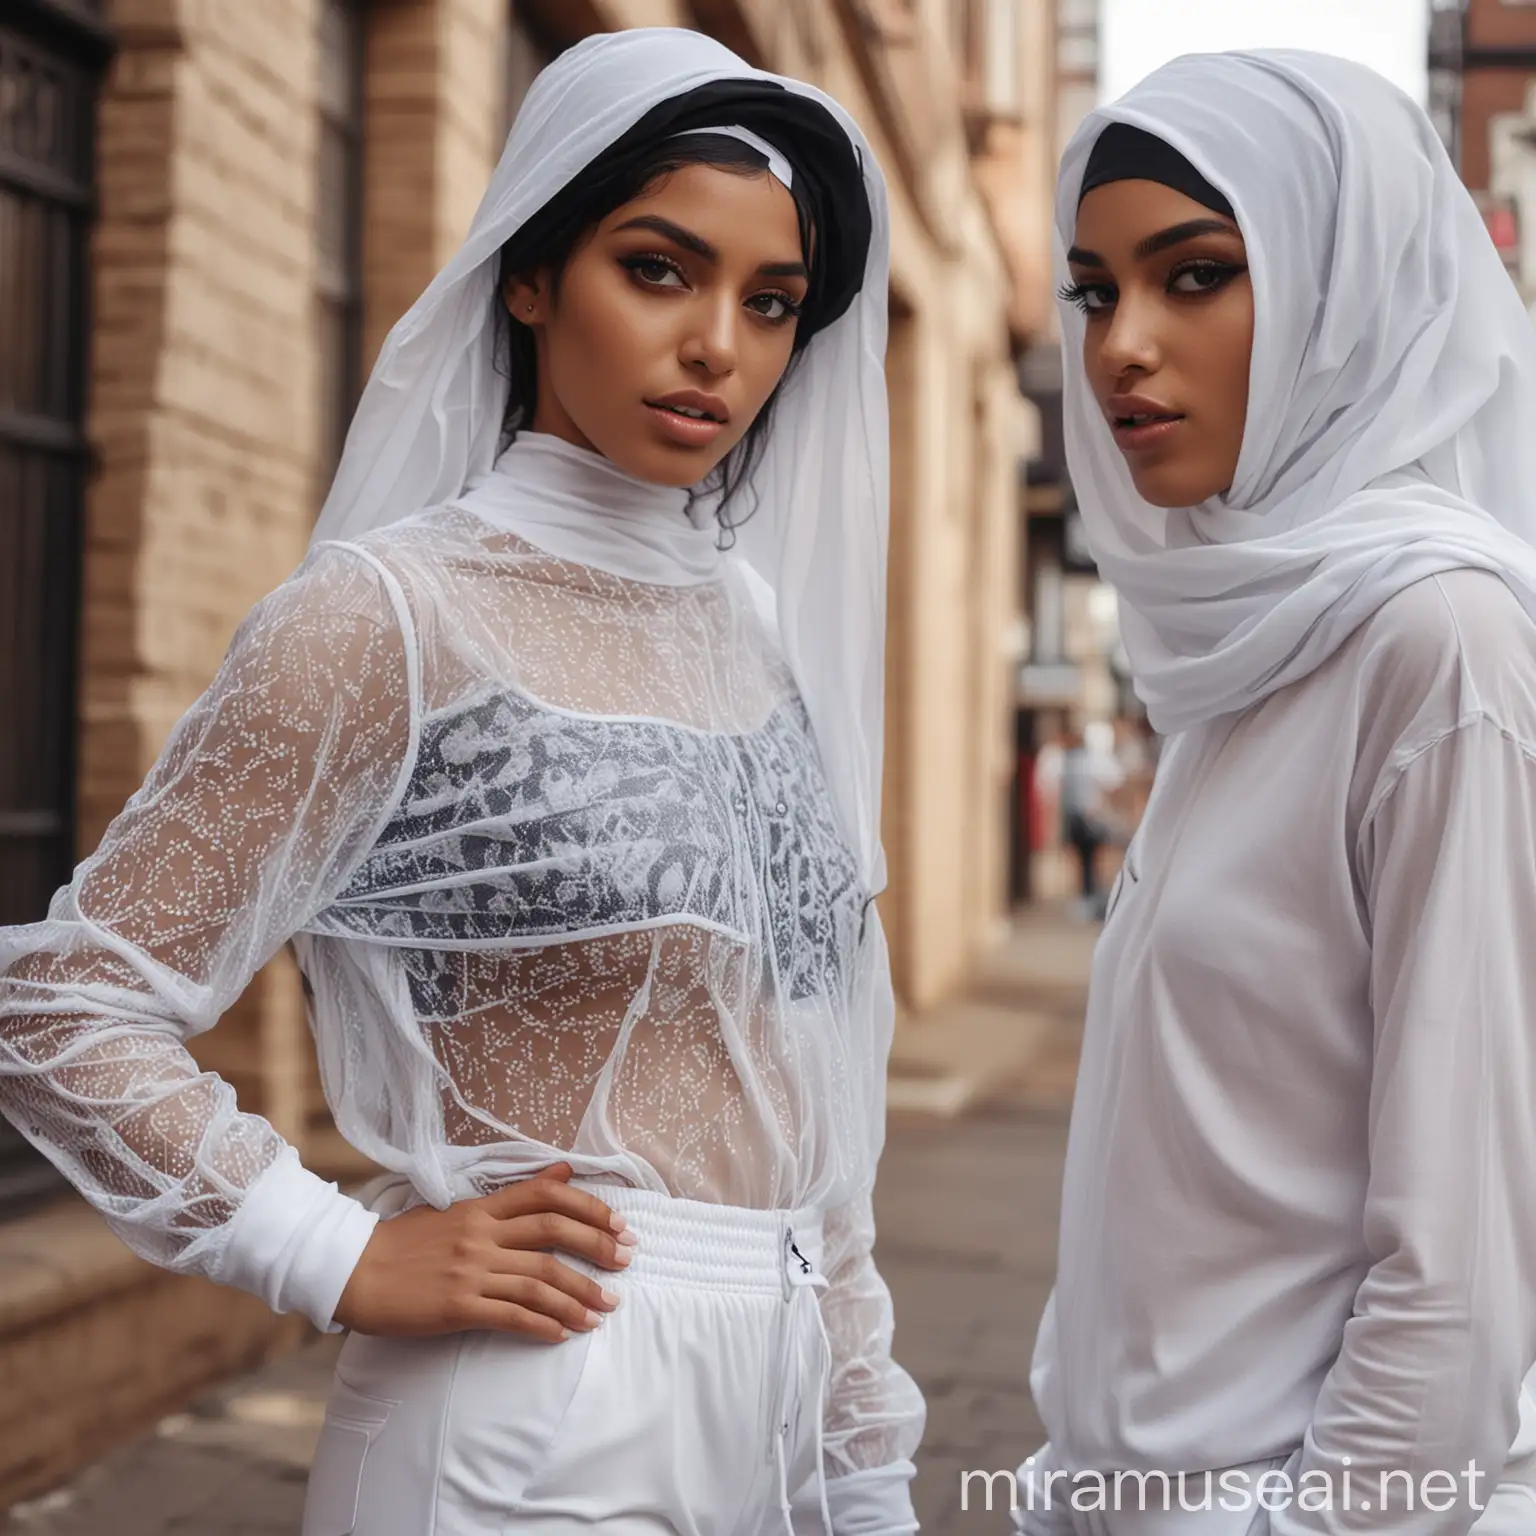 A Tuareg from Beale Streets in Memphis TN wearing black pyramid white see through shirt, white see through joggers, white nike cap, looks lovingly into the eyes of the charming and beautiful Instagram model Aitana Lopez, an ethnic Arab fashionista, an Arab woman with blue eyes in a high-contrast niqab, UHD 8k